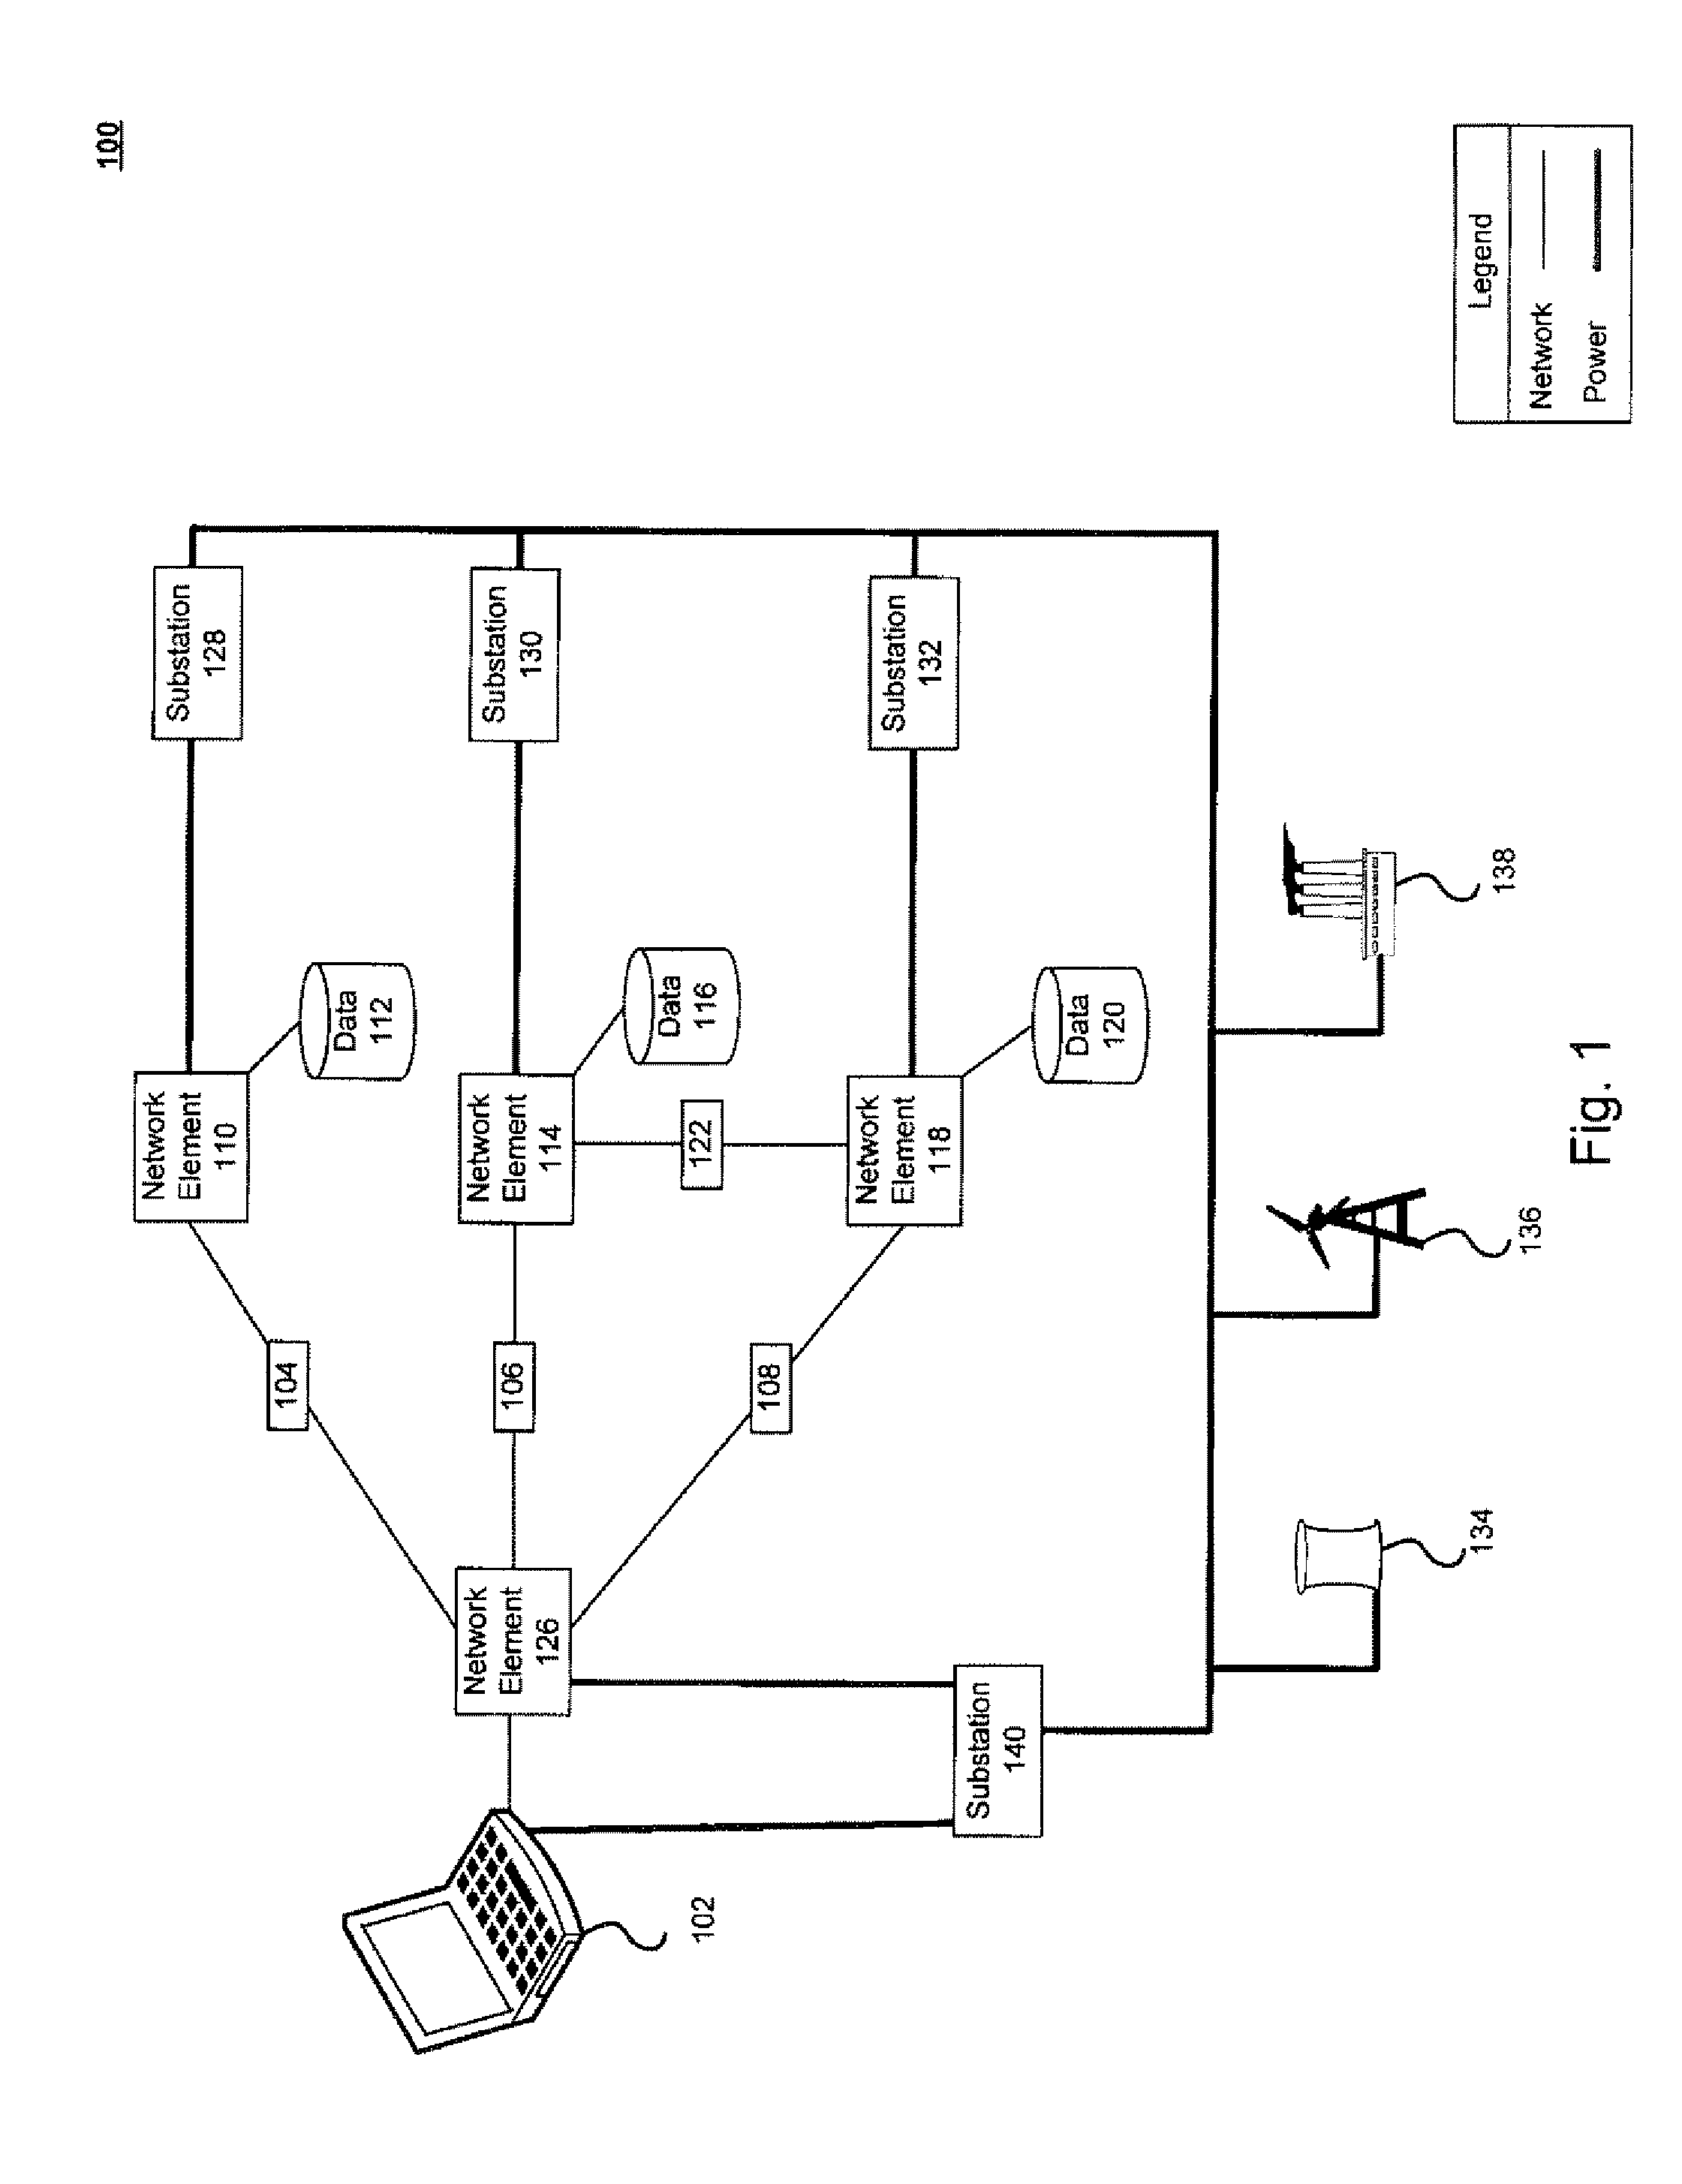 Method and system for energy efficient routing and network services